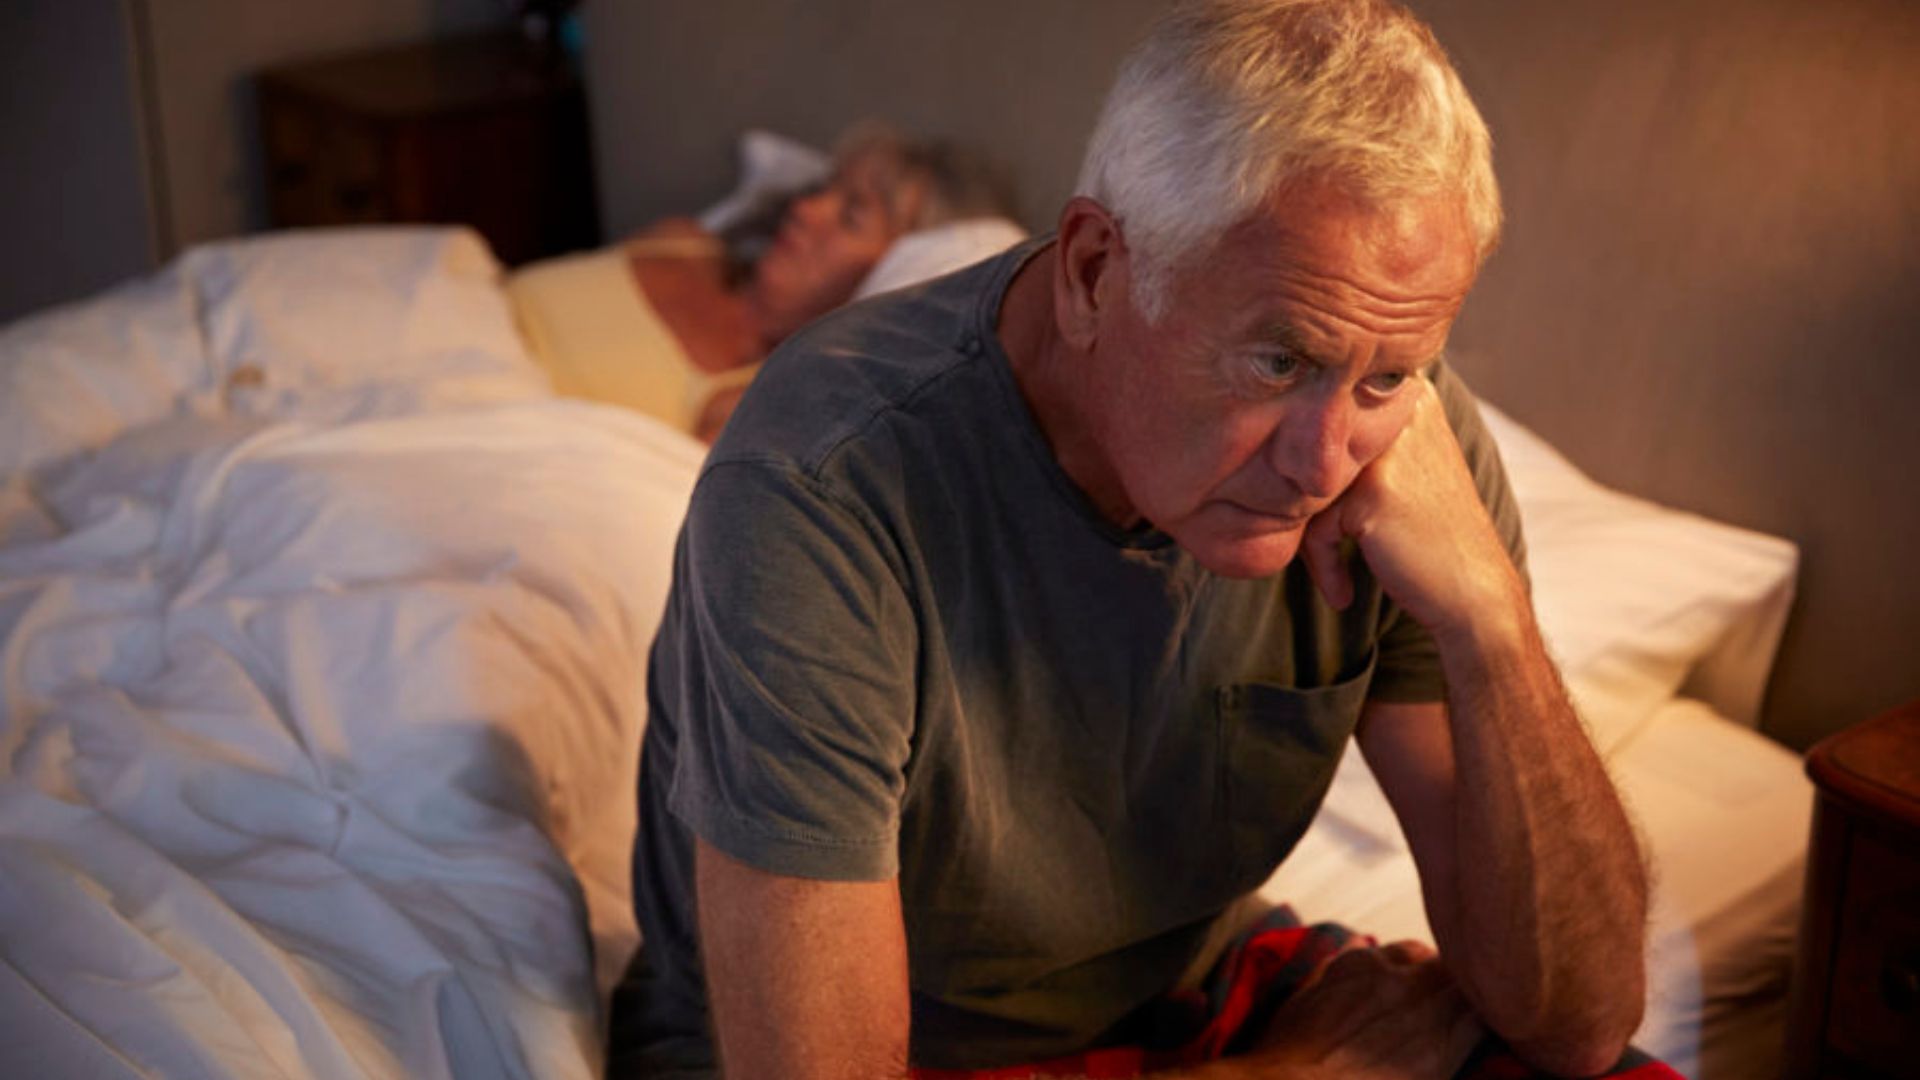 Old Man Sitting On Bed Depressed about something